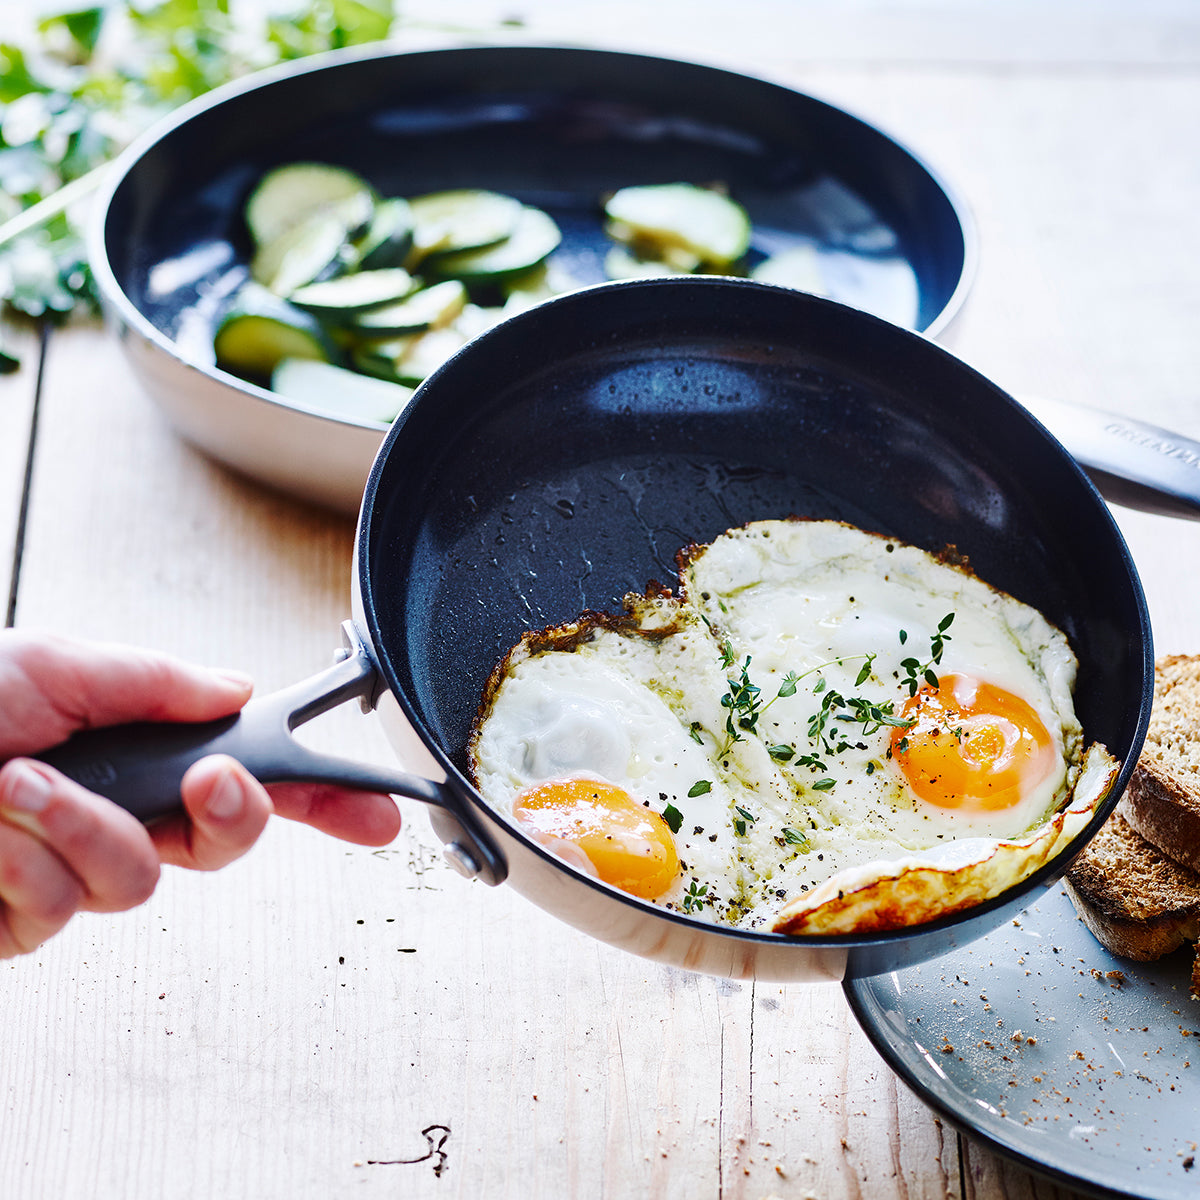 10 Best Frying Pans to Buy in 2022 - Nonstick, Ceramic, and More